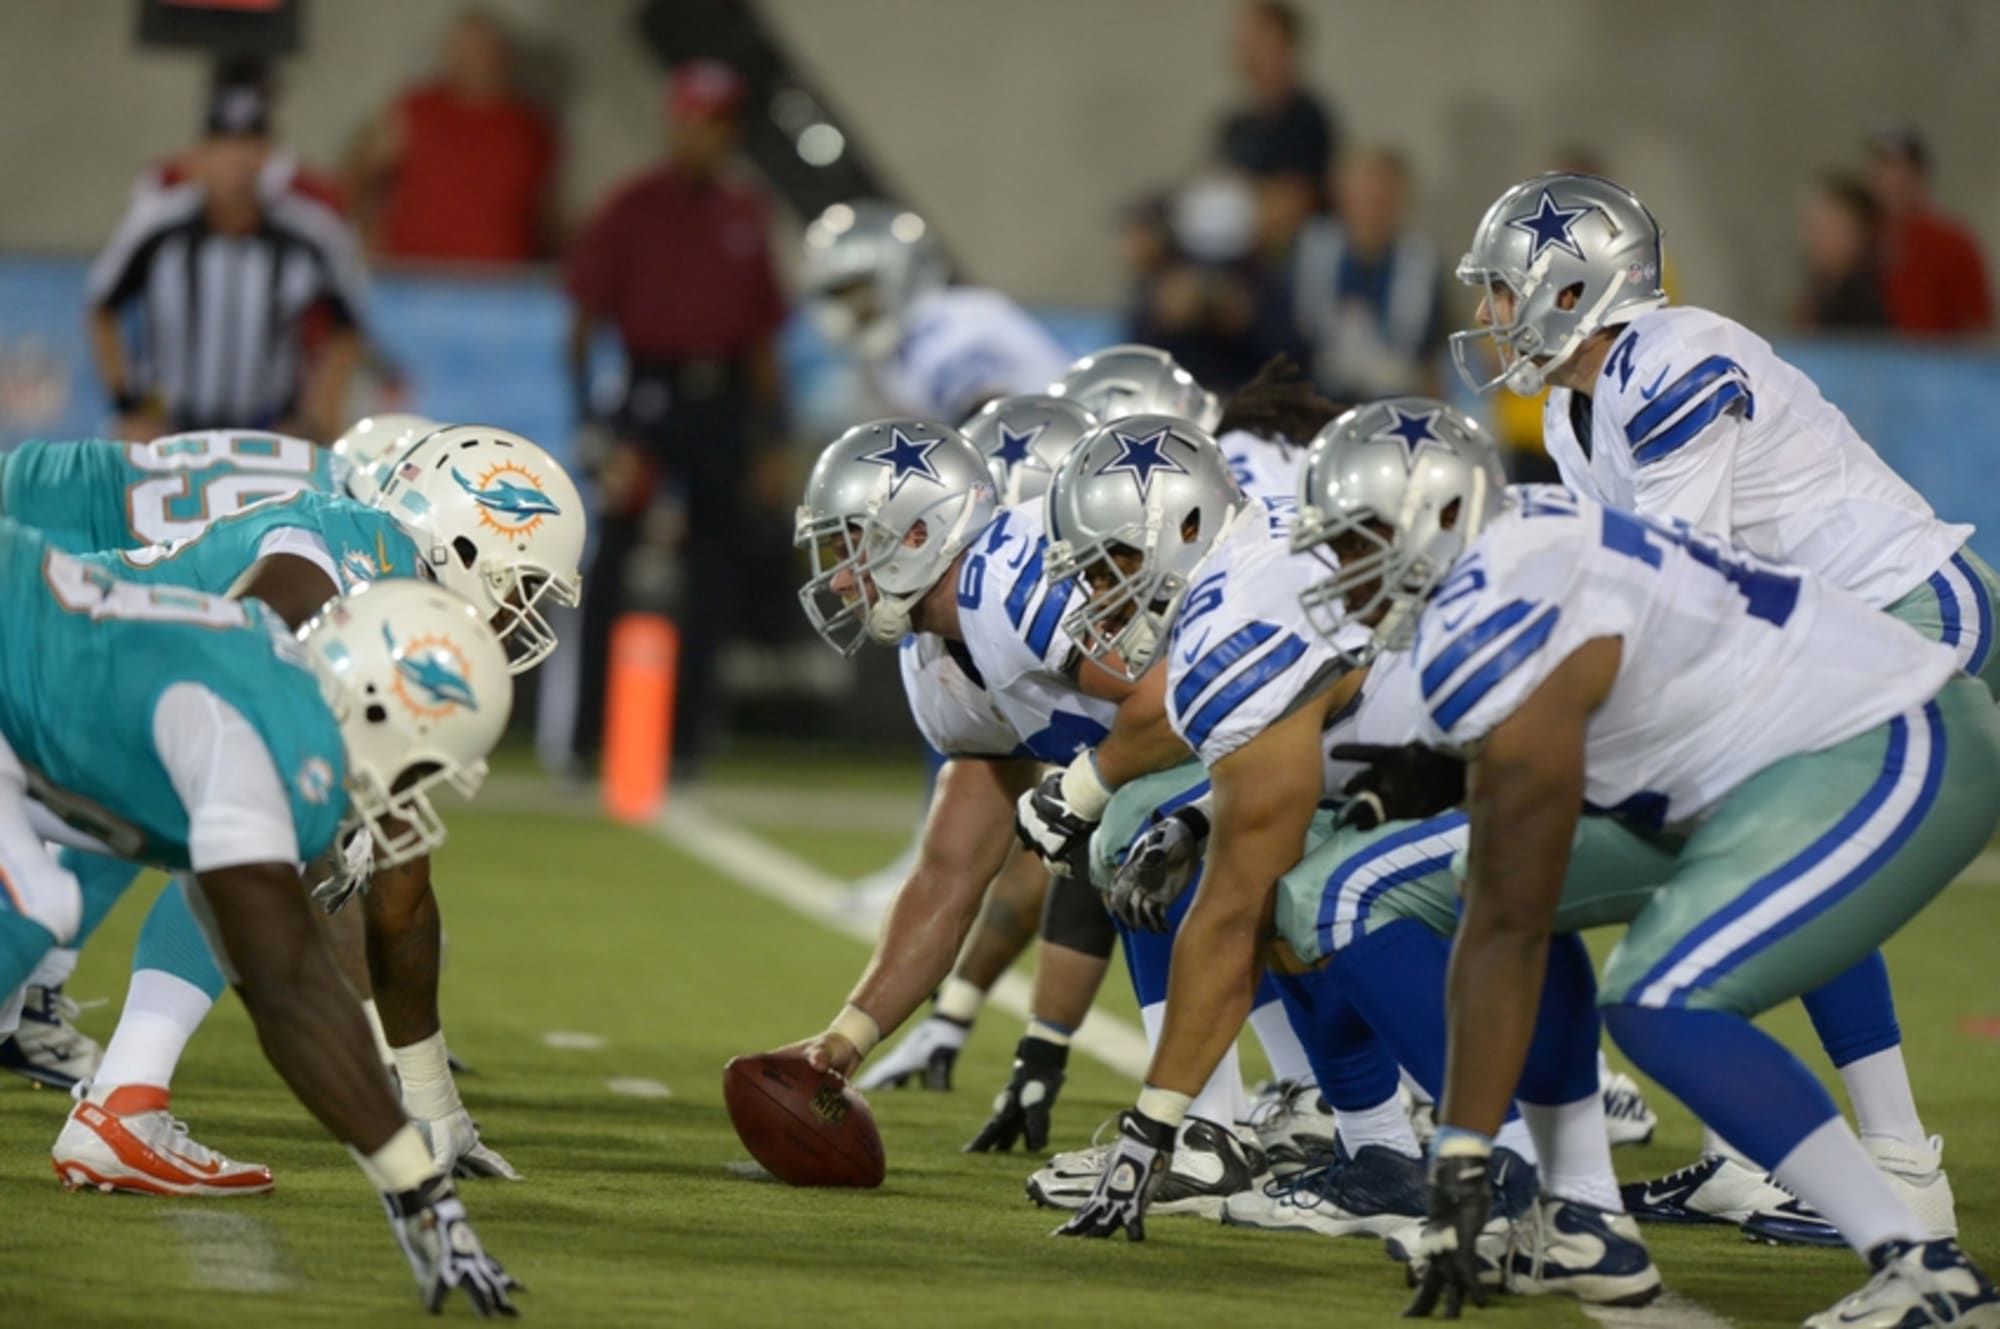 Cowboys vs Dolphins live stream, radio, start time, TV info and more